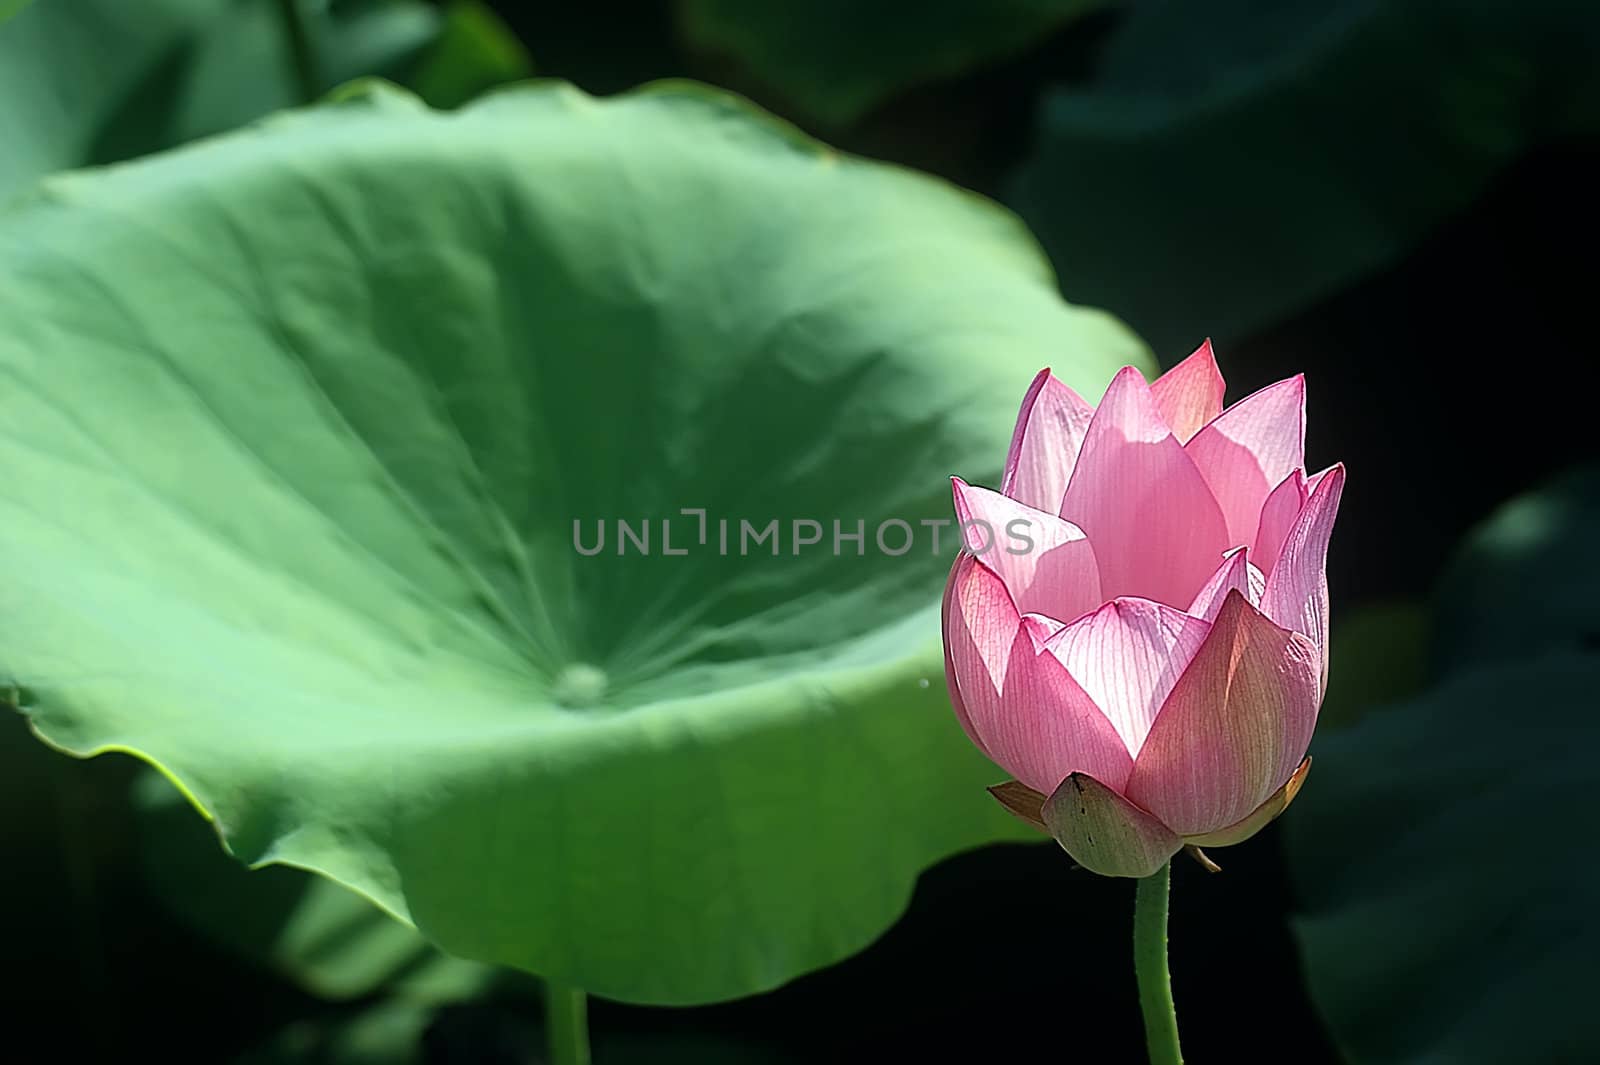 Lotus flower by xfdly5